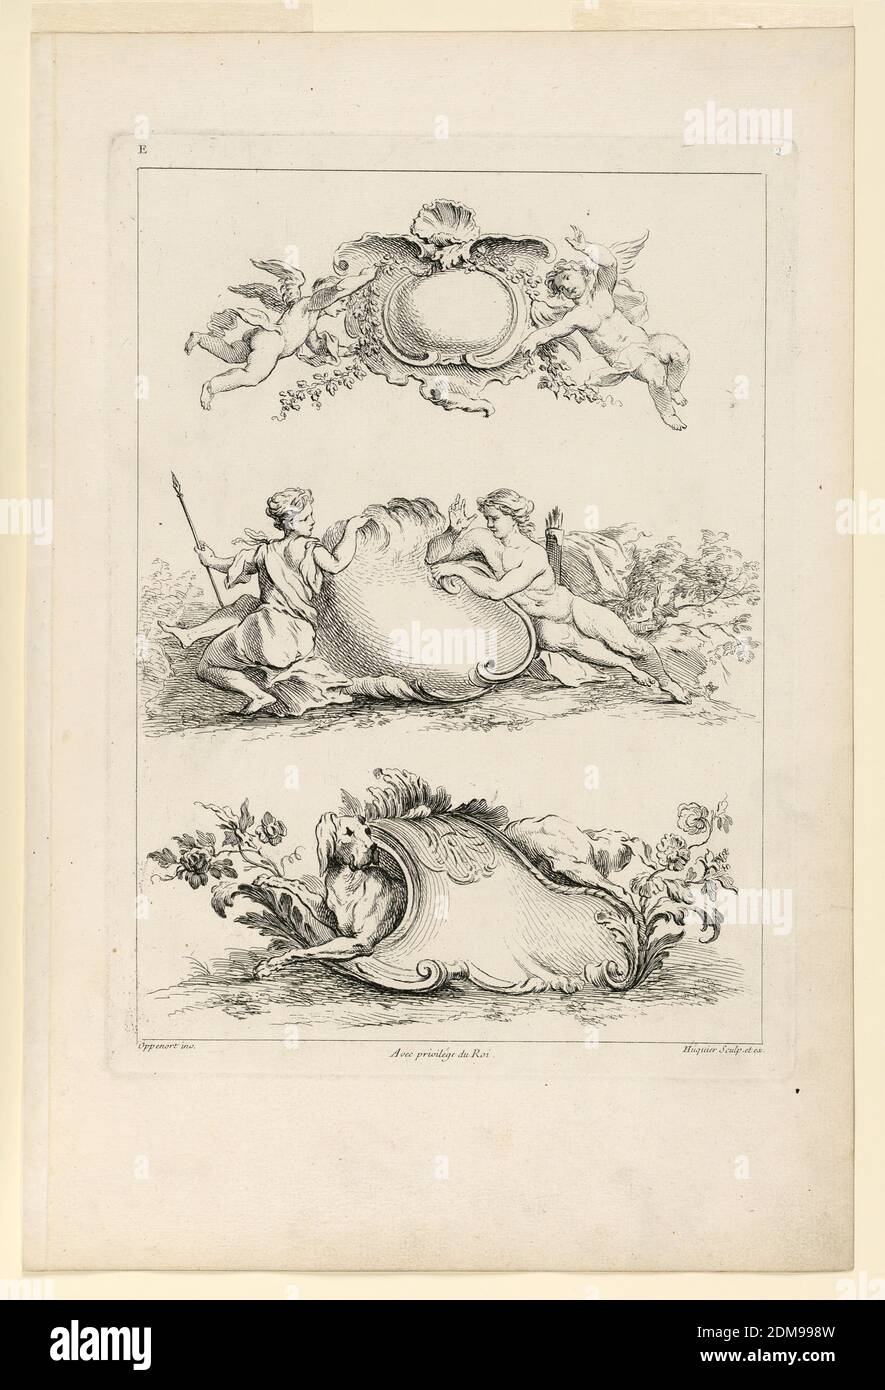 Page Two from 'Cinquième Livre Contenant des Cartouches Inventés par G. M. Oppenort Architecte du Roi et Gravé par Huquier', Gilles-Marie Oppenord, French, 1672–1742, Gabriel Huquier, French, 1695–1772, Etching on paper, Three cartouches in sequence. First is flown by two small angels; second on ground flanked by two seated nymphs. Third with a dog. Inscribed, upper left: 'E'; upper right: 'Q'; lower left: 'Oppenort inv.'; center: 'Avec privilege du Roi'; lower right: 'Huquier sculp. et ex.', France, after 1751, Print Stock Photo